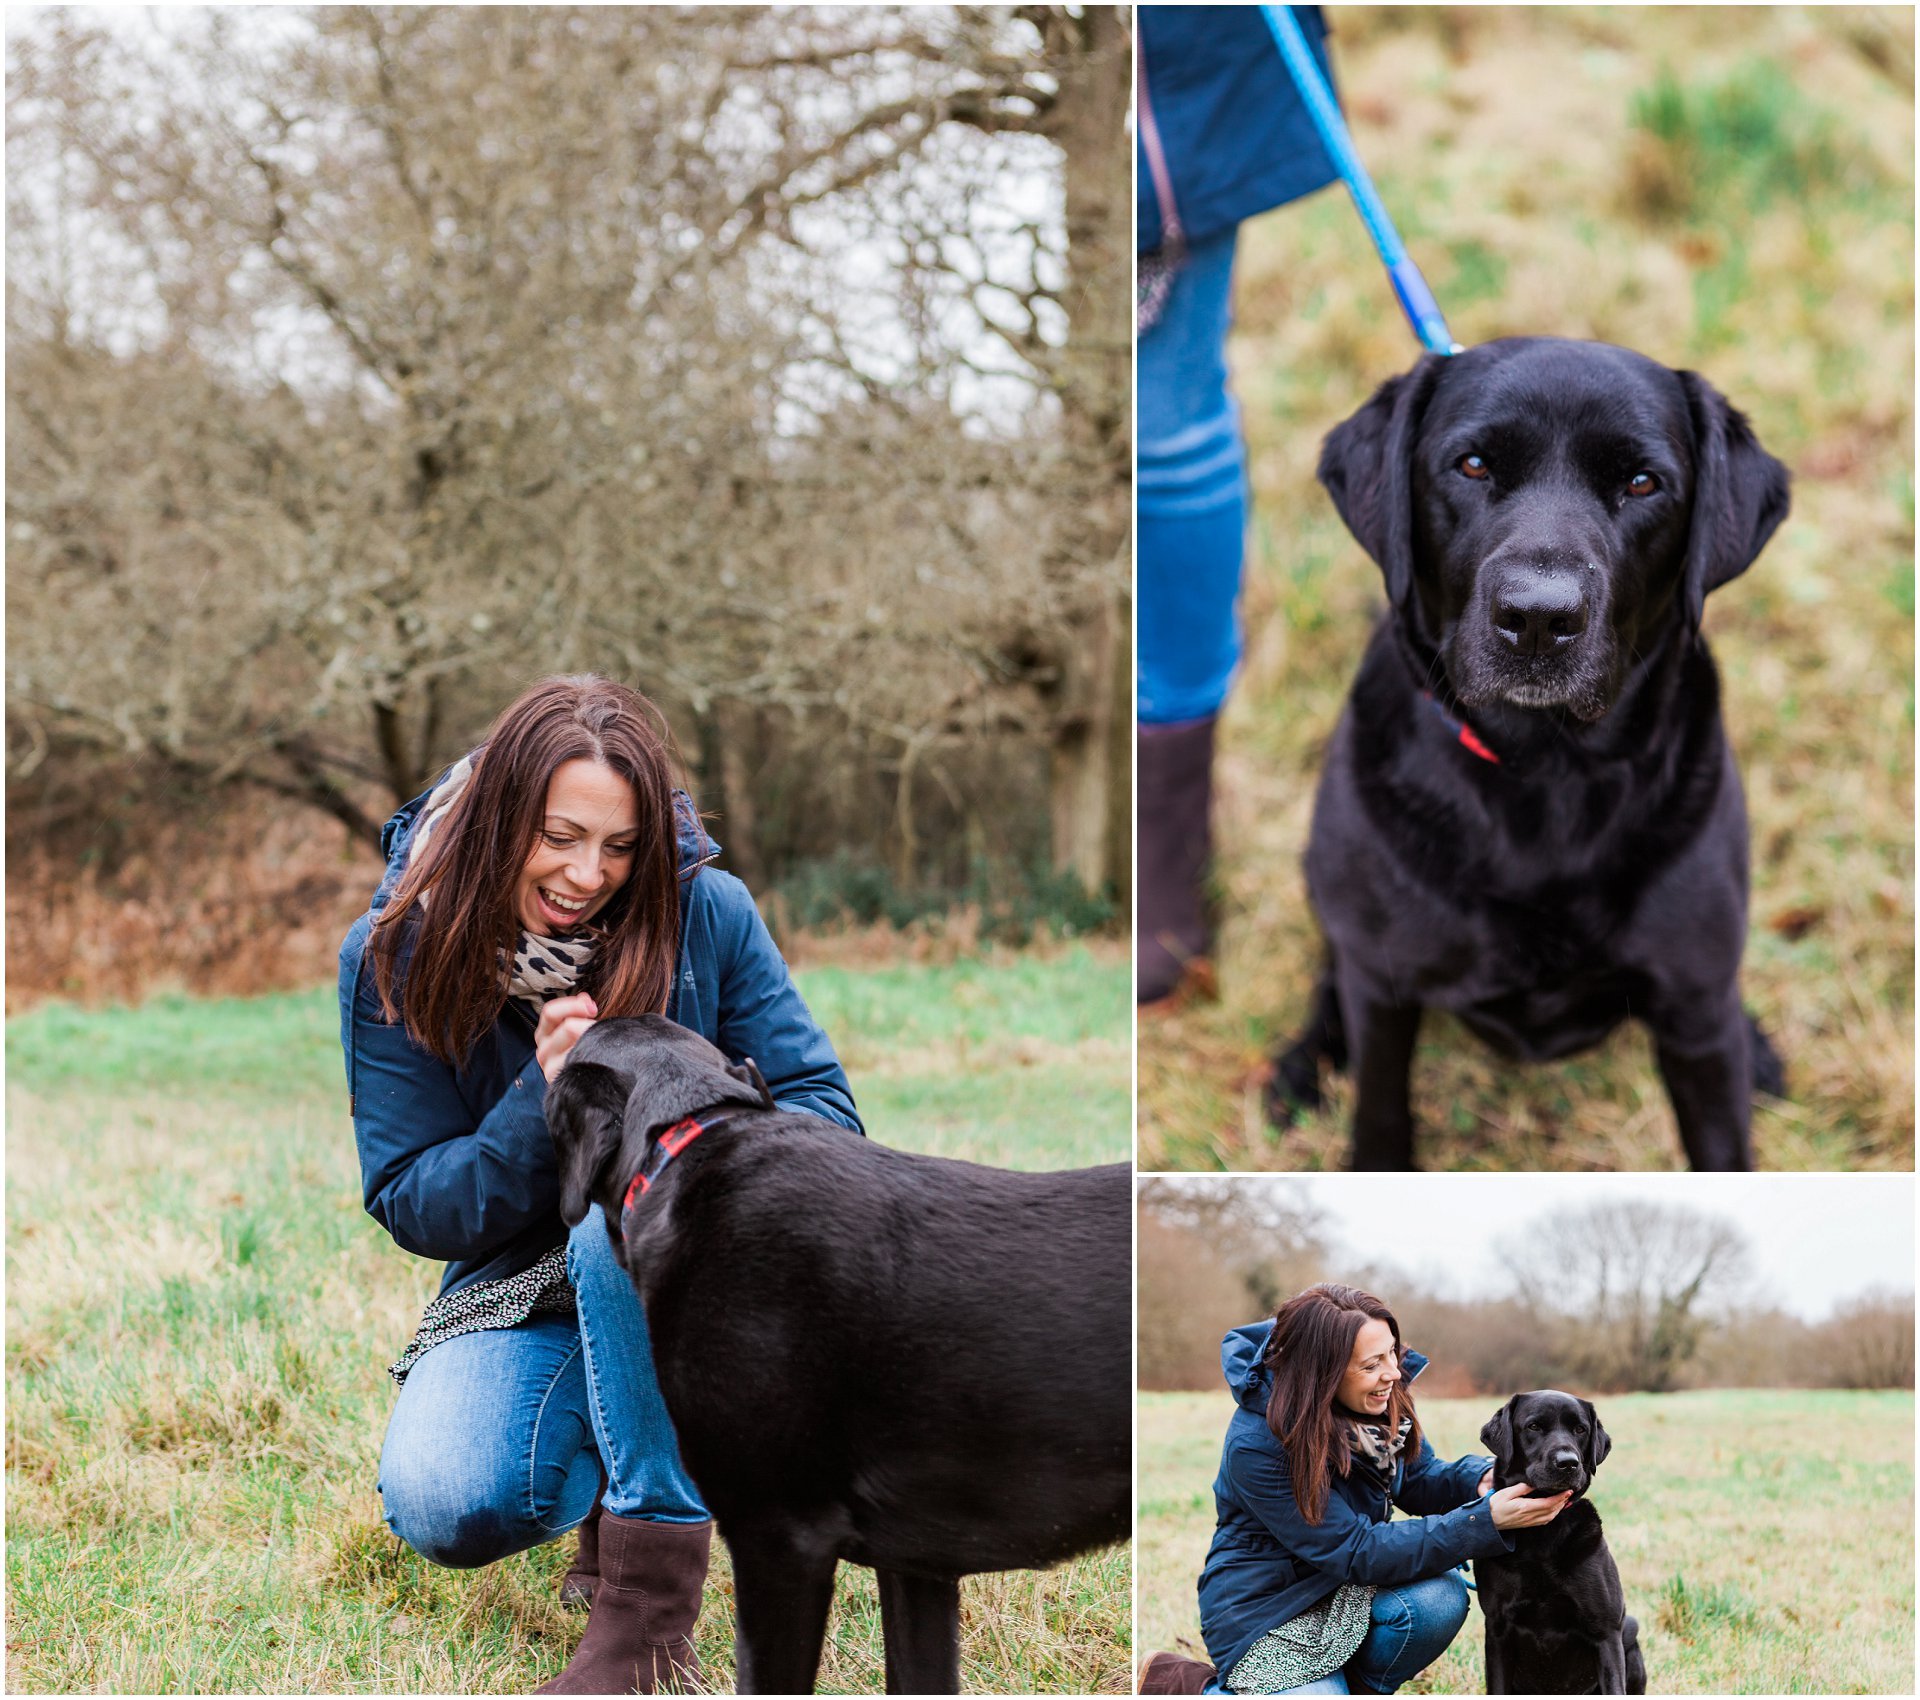 Brand photo of female entrepreneur with her dog.  Images by London brand photographer AKP Branding Stories